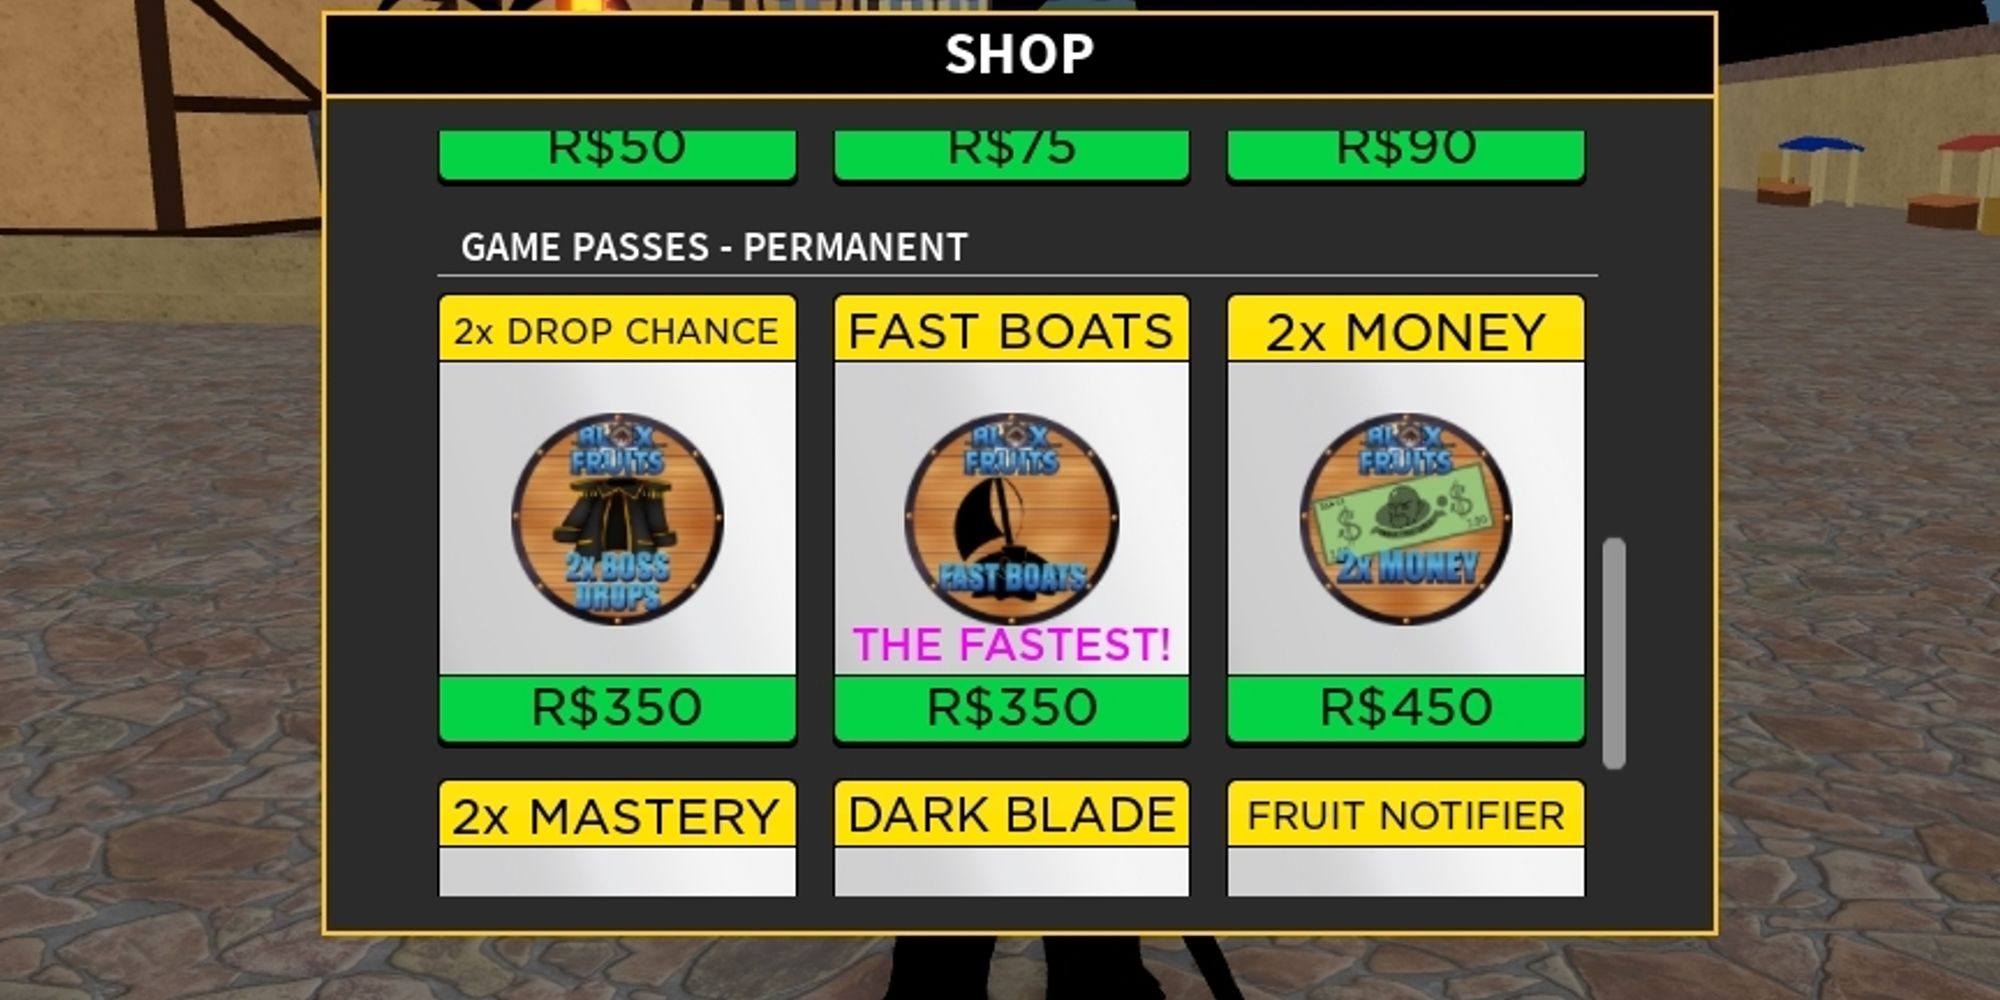 shop showing 2x drop chance, fast boats, and 2x money gamepass